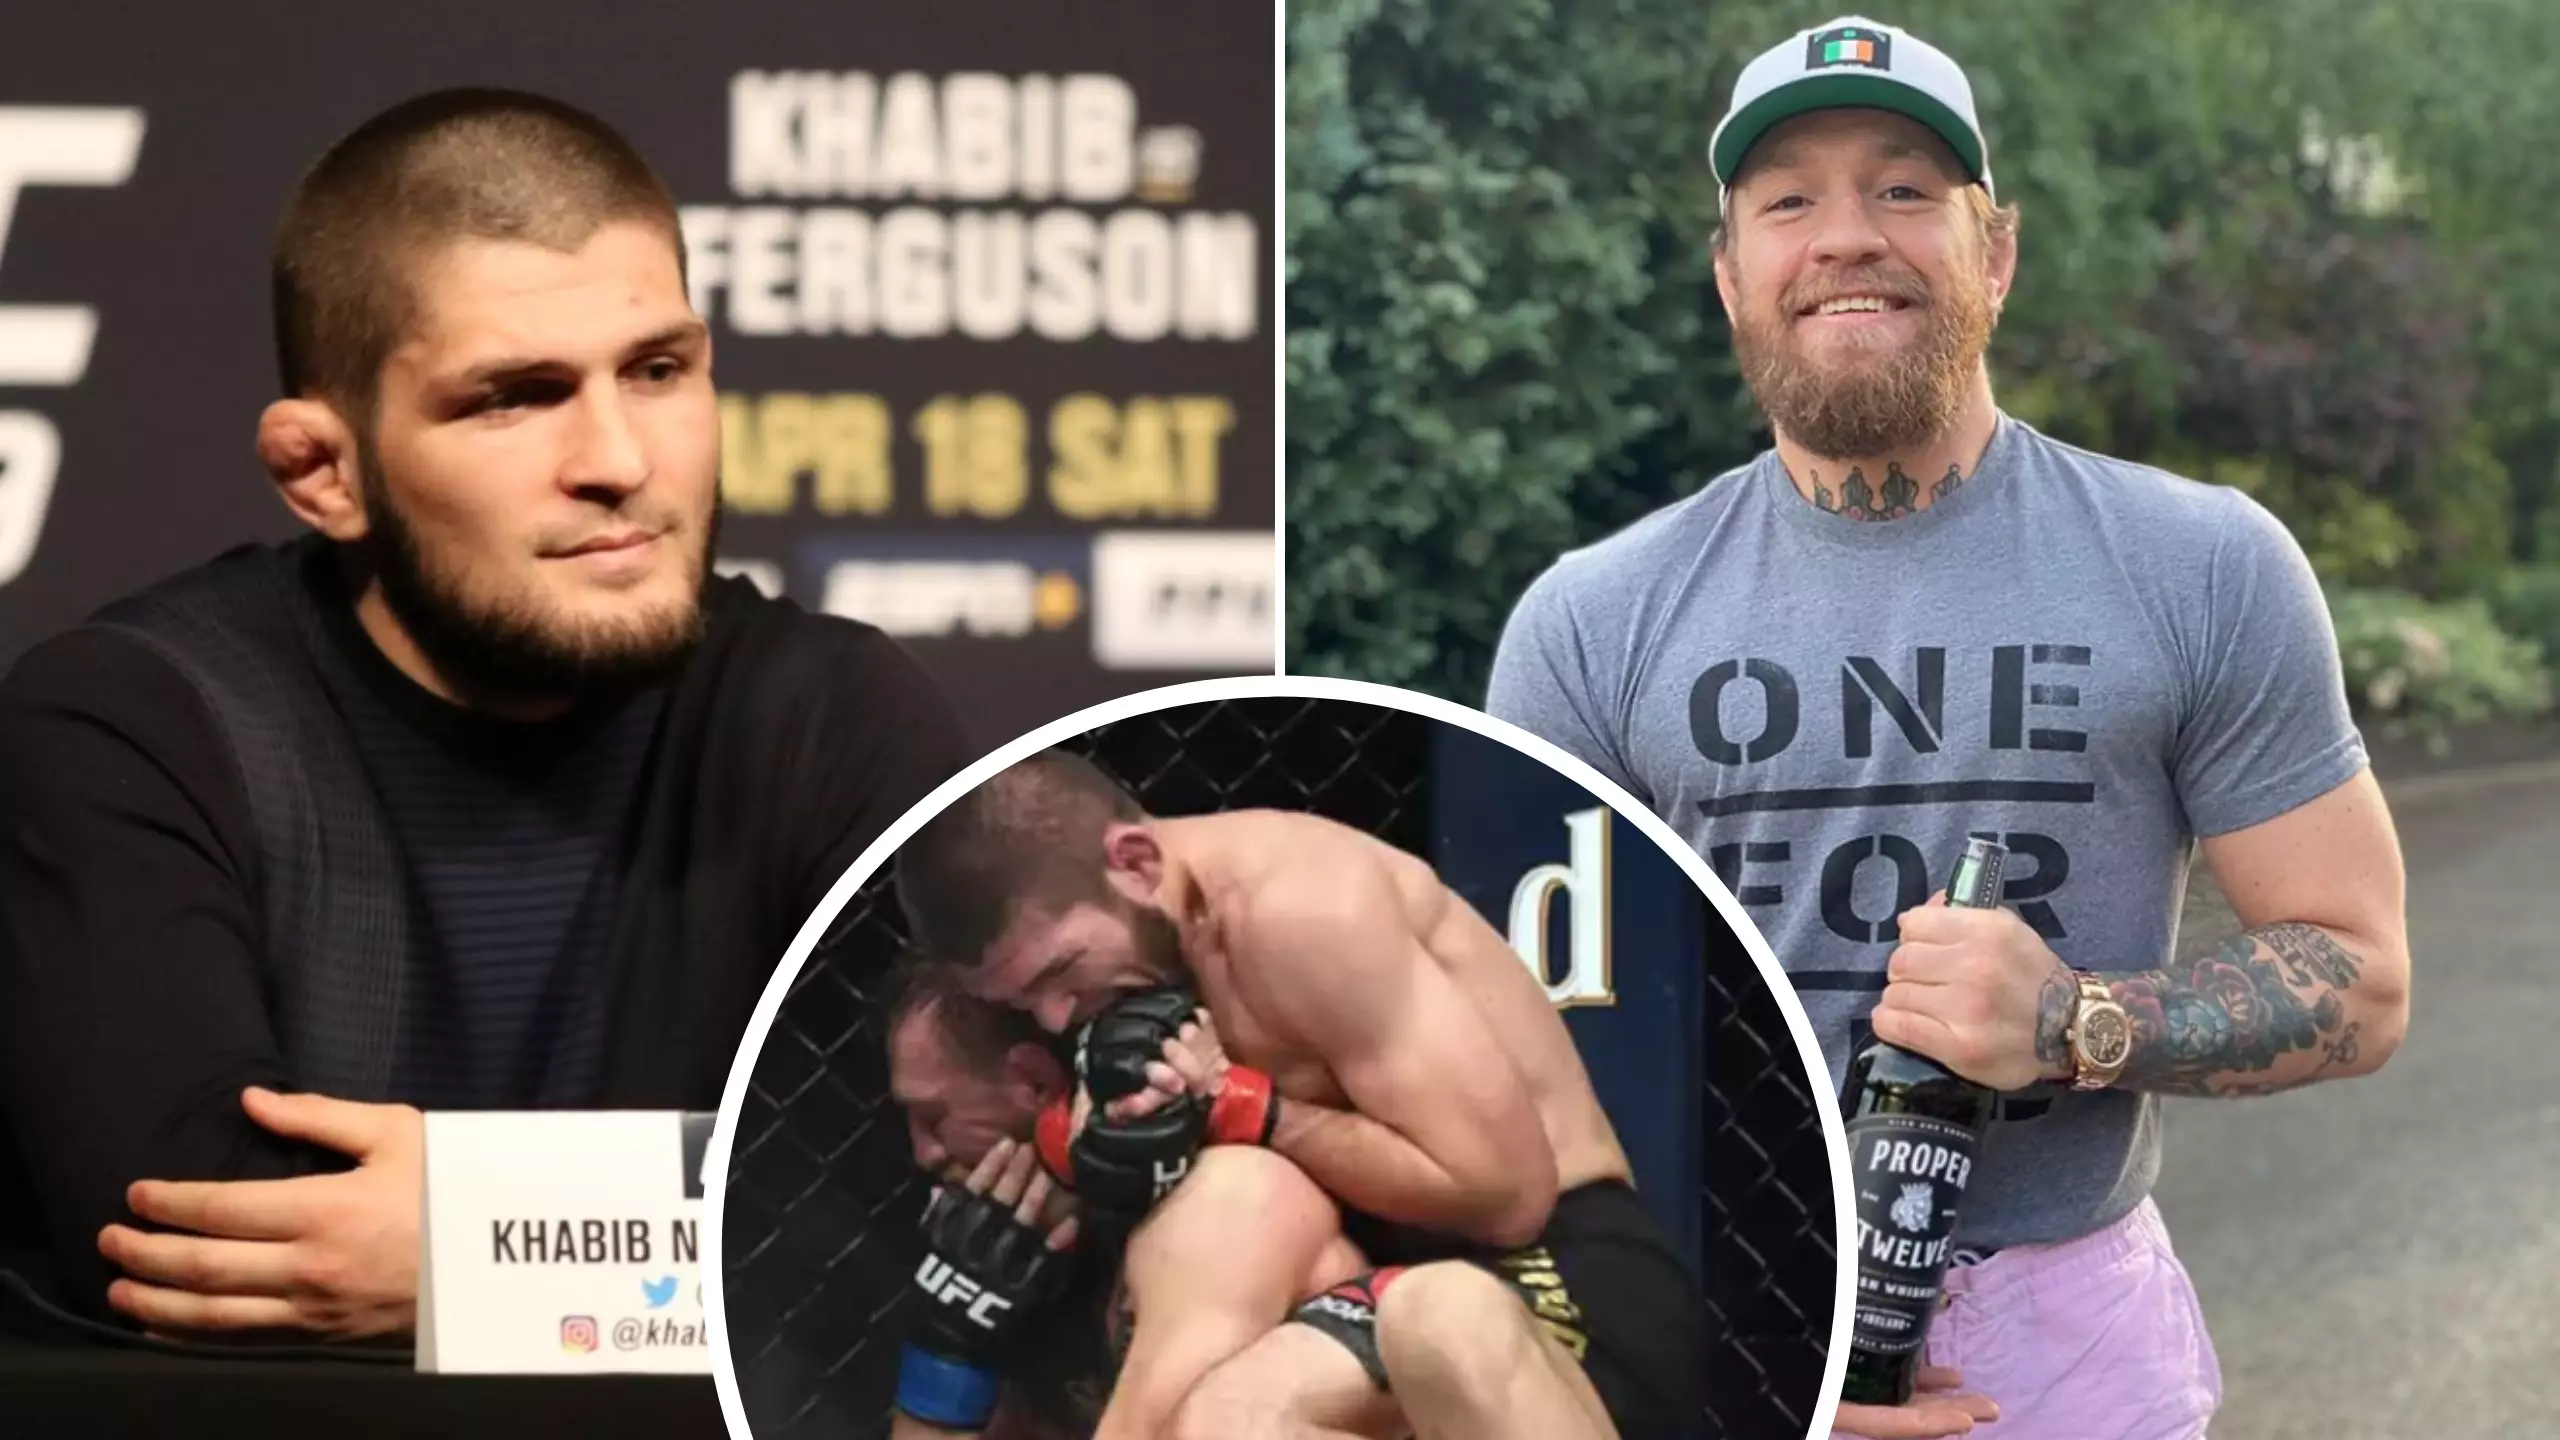 Khabib Nurmagomedov's Annual Earnings Are A Third LESS Than Conor McGregor's